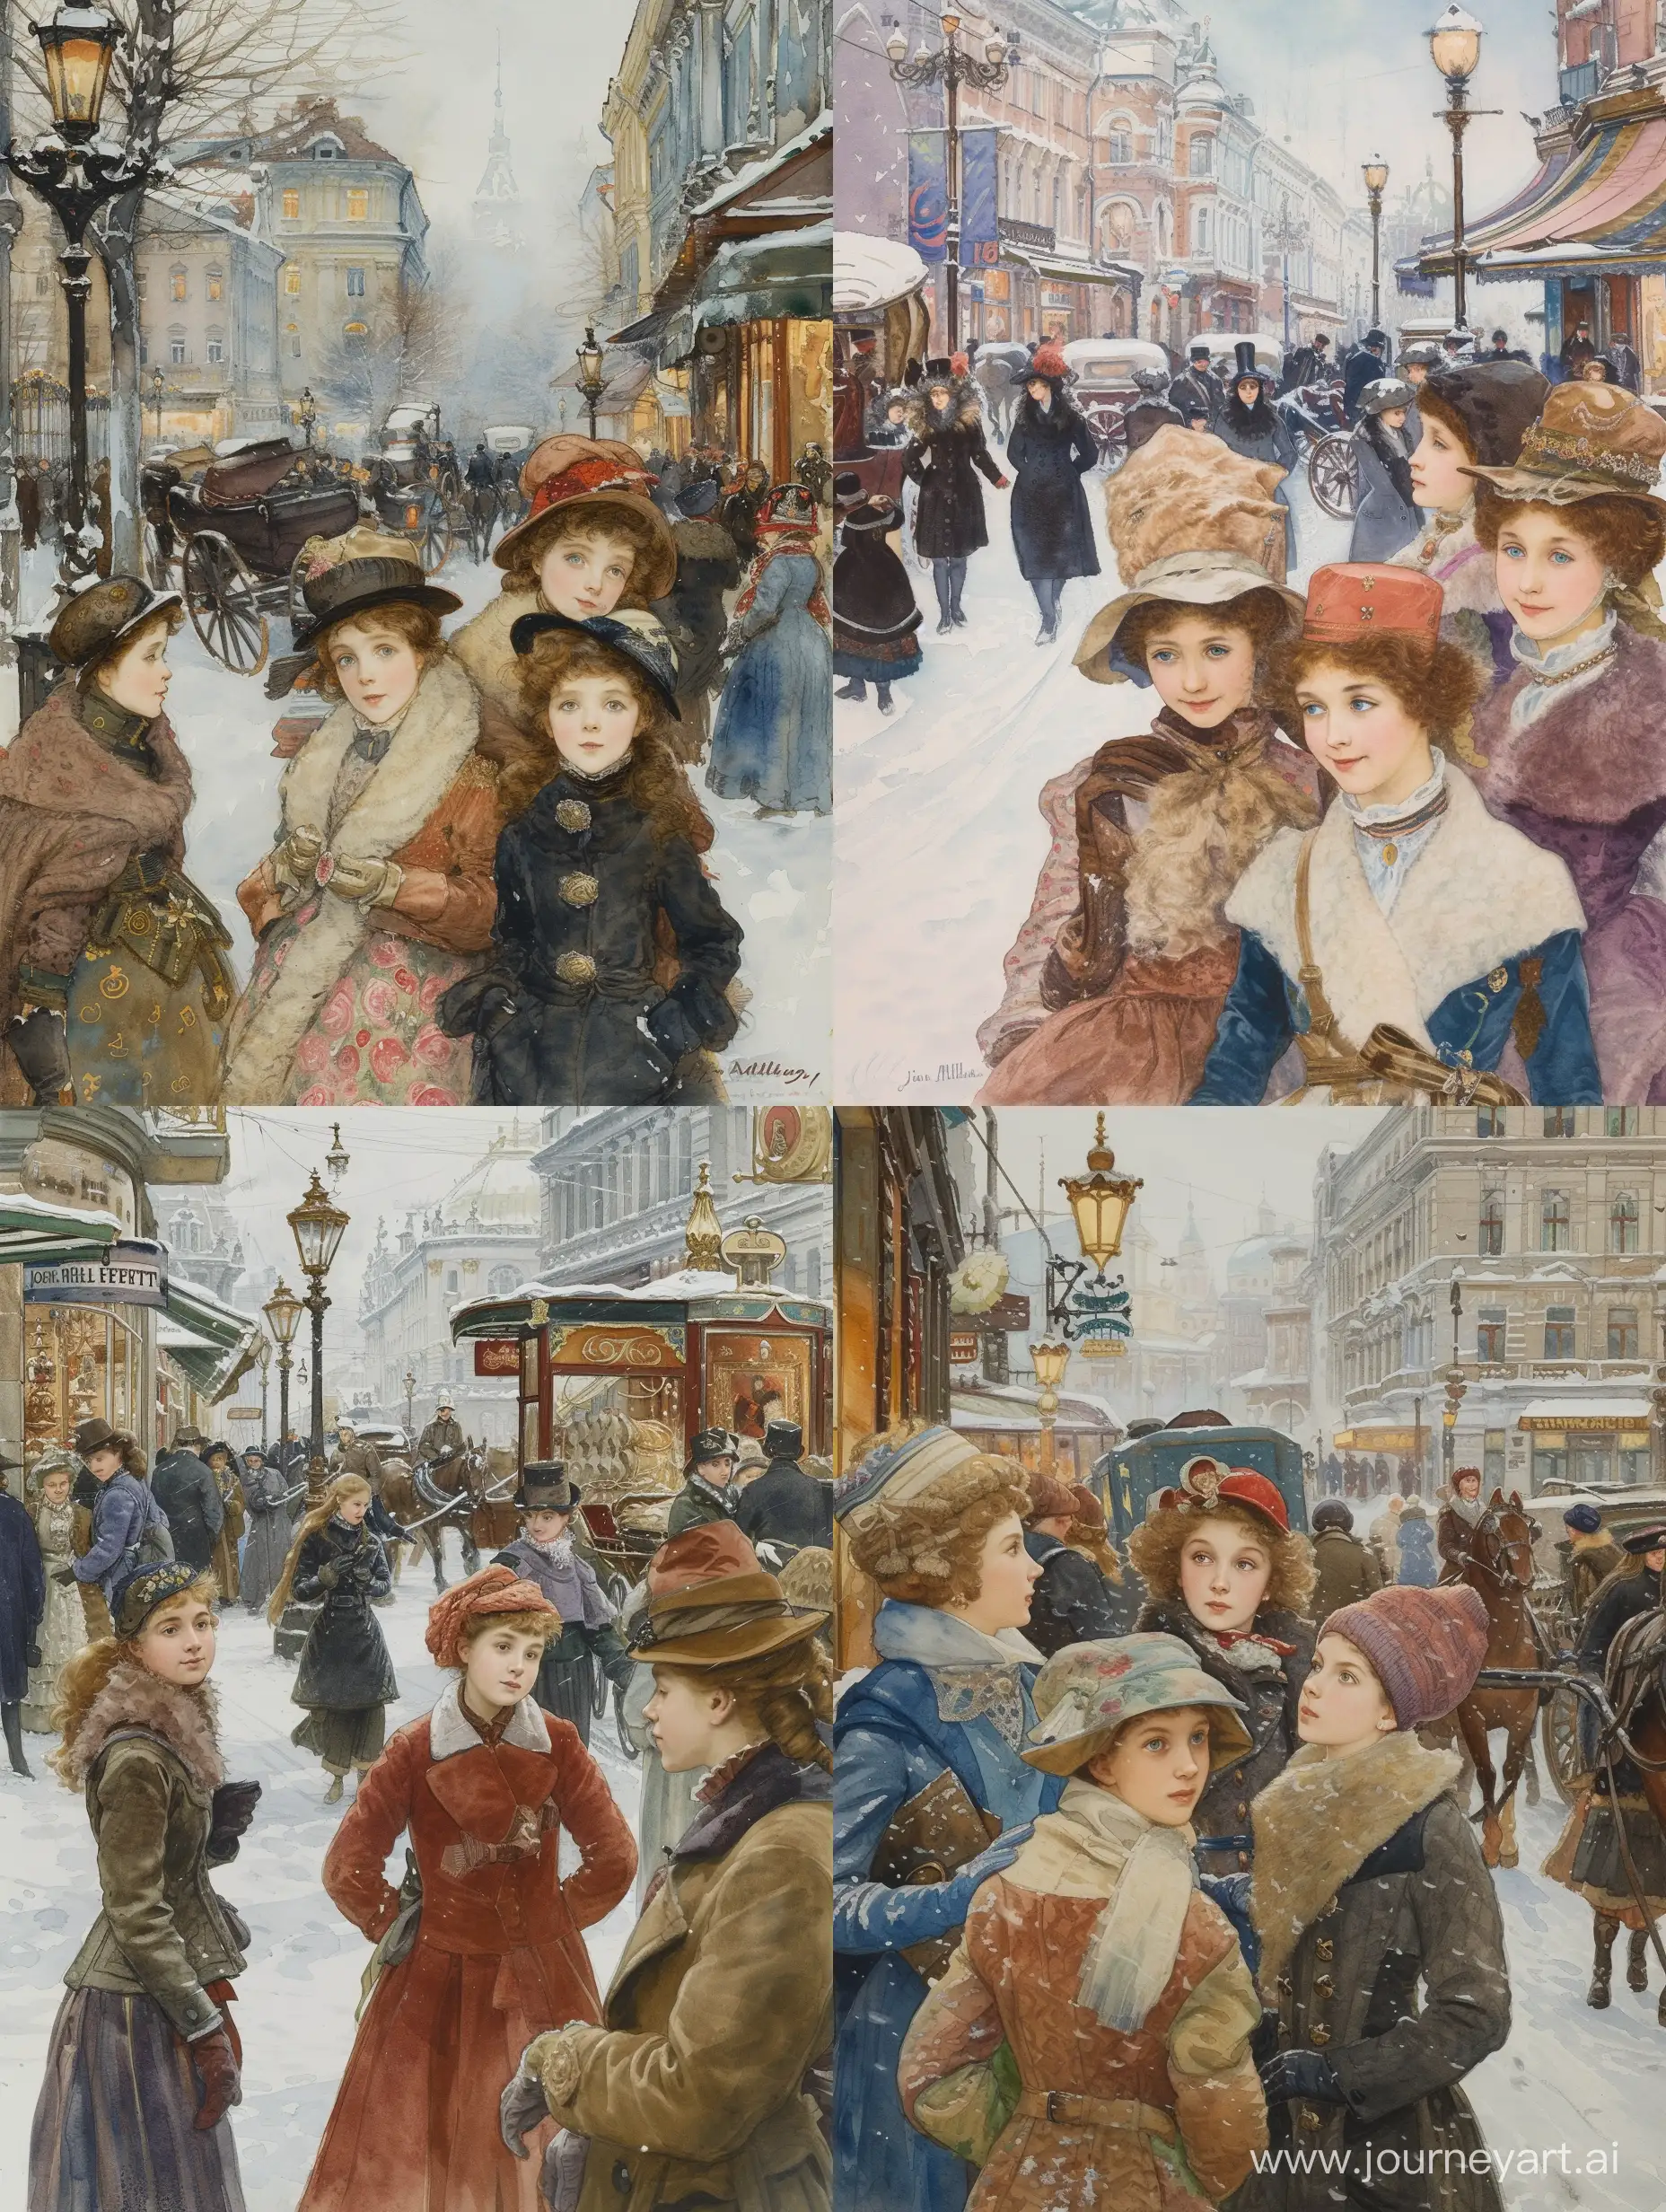 Subject: The central theme of the image is a winter scene in Moskau in 1910, capturing the essence of a busy street. The focus is on a group of elegant girls, highlighting the fashion and lifestyle of the time. The artist, John Everett Millais, skillfully brings the historic setting to life through his Watercolor painting. Setting: The background features a bustling street in Moskau during winter, creating a lively atmosphere with people engaging in various activities. The winter setting adds a charming touch, with perhaps snow-covered streets and vintage architecture. Style/Coloring: Millais employs the classic style of Watercolor painting, using rich and warm colors to evoke the ambiance of the early 20th century. The winter palette may include cool tones like blues and grays, contrasting with the vibrant colors of the girls' clothing. Action: The girls are depicted engaging in daily life activities, suggesting movement and vivacity. Millais captures the dynamic energy of the busy street, enhancing the narrative of the era. Items/Costume: The girls are likely adorned in fashionable clothing of the time, showcasing the trends and styles prevalent in 1910 Moskau. The painting may feature accessories such as hats, gloves, and other period-specific items. Appearance: The characters' appearances are refined and sophisticated, reflecting the societal norms and fashion of the early 20th century. Millais pays attention to detail, emphasizing the unique facial expressions and features of each individual. Accessories: The accessories in the painting, such as street lamps, horse-drawn carriages, and storefronts, contribute to the historical context. These details add depth and authenticity to the overall composition.